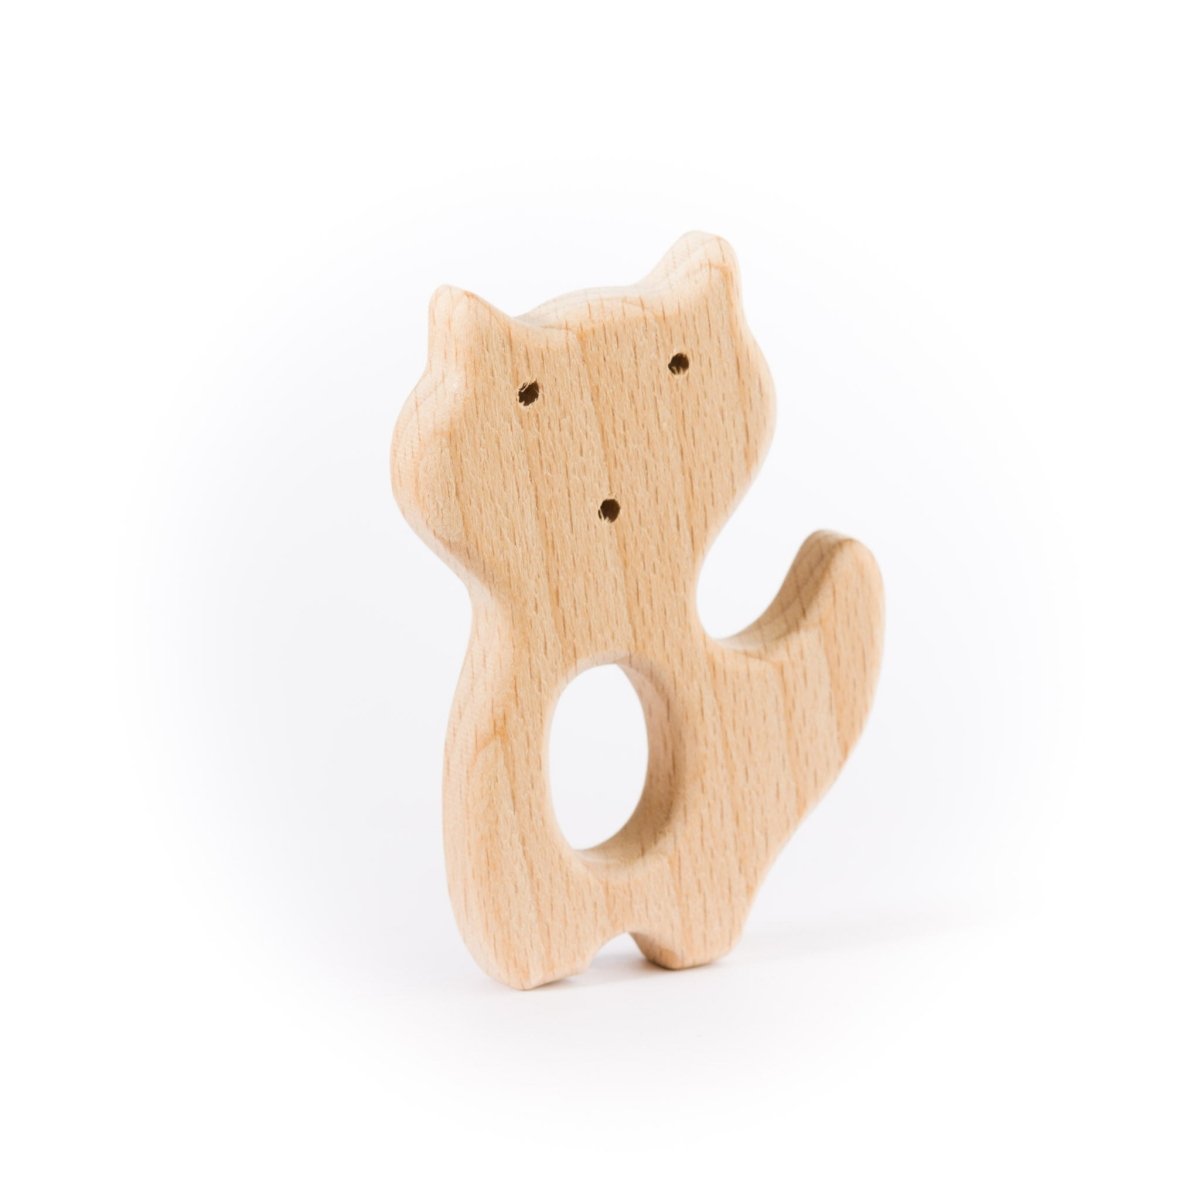 Wood Rings & Pendants Small - Beech Wood Fox from Cara & Co Craft Supply